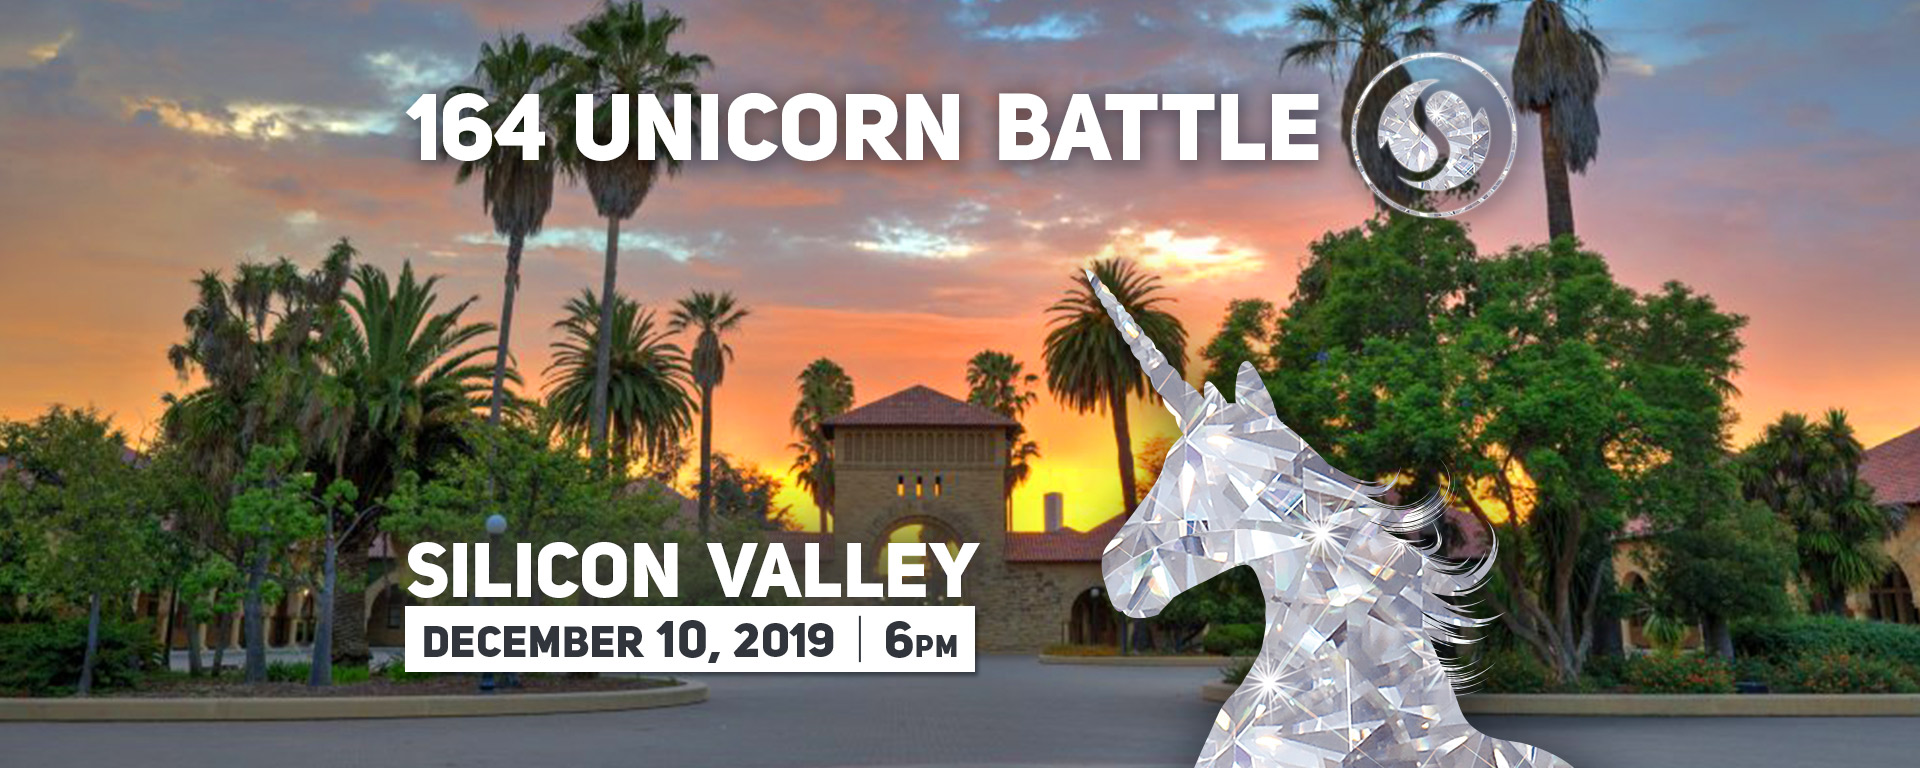 164 Unicorn Battle In Silicon Valley December 10 2019 Events For